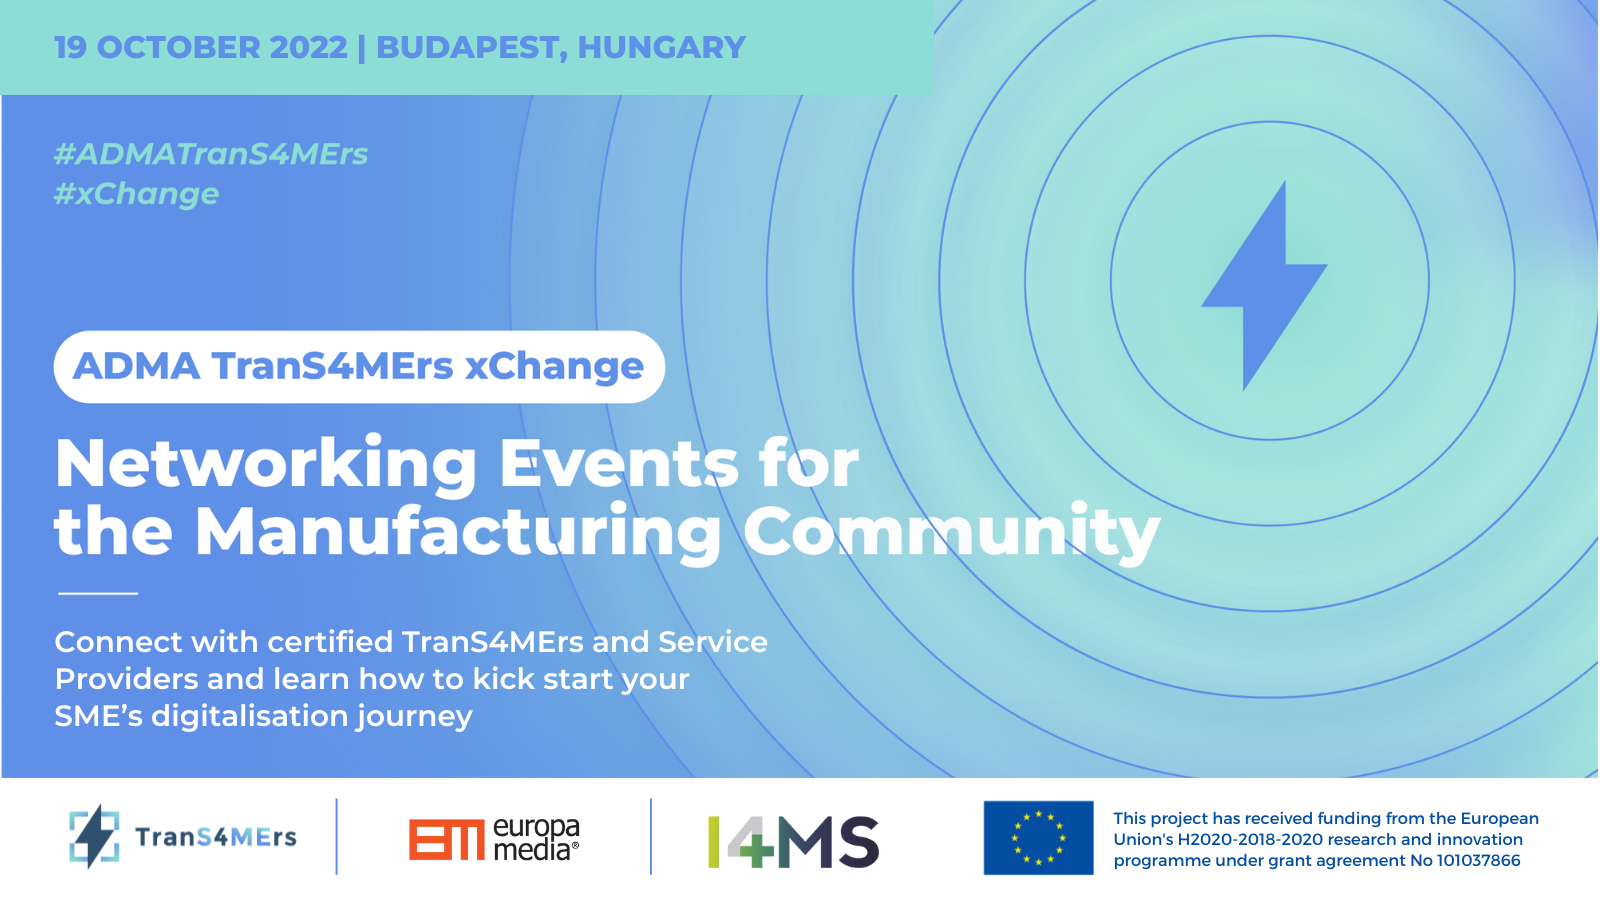 ADMA TranS4MErs xChange event: networking and funding opportunities for the digitalisation of European manufacturing